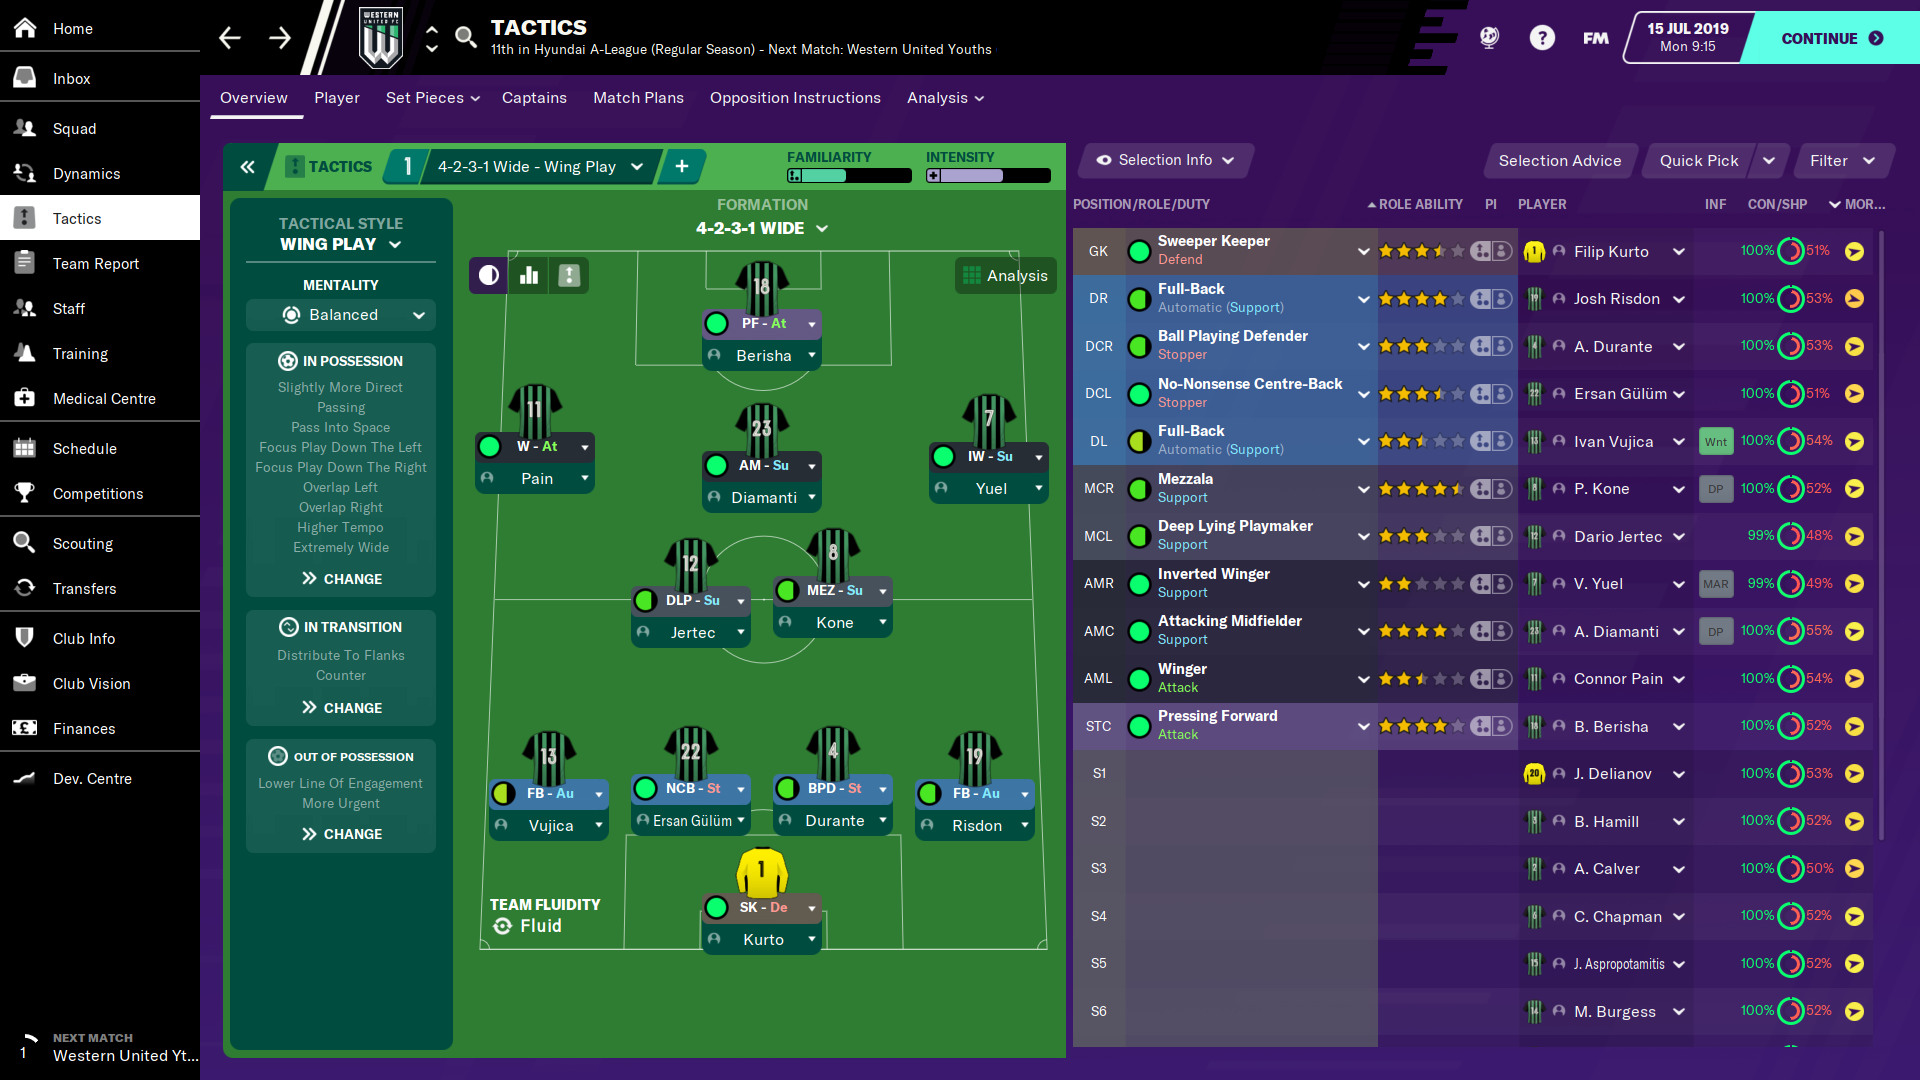 Football Manager 2022: The 20 best teams to manage in the new game - The  Athletic